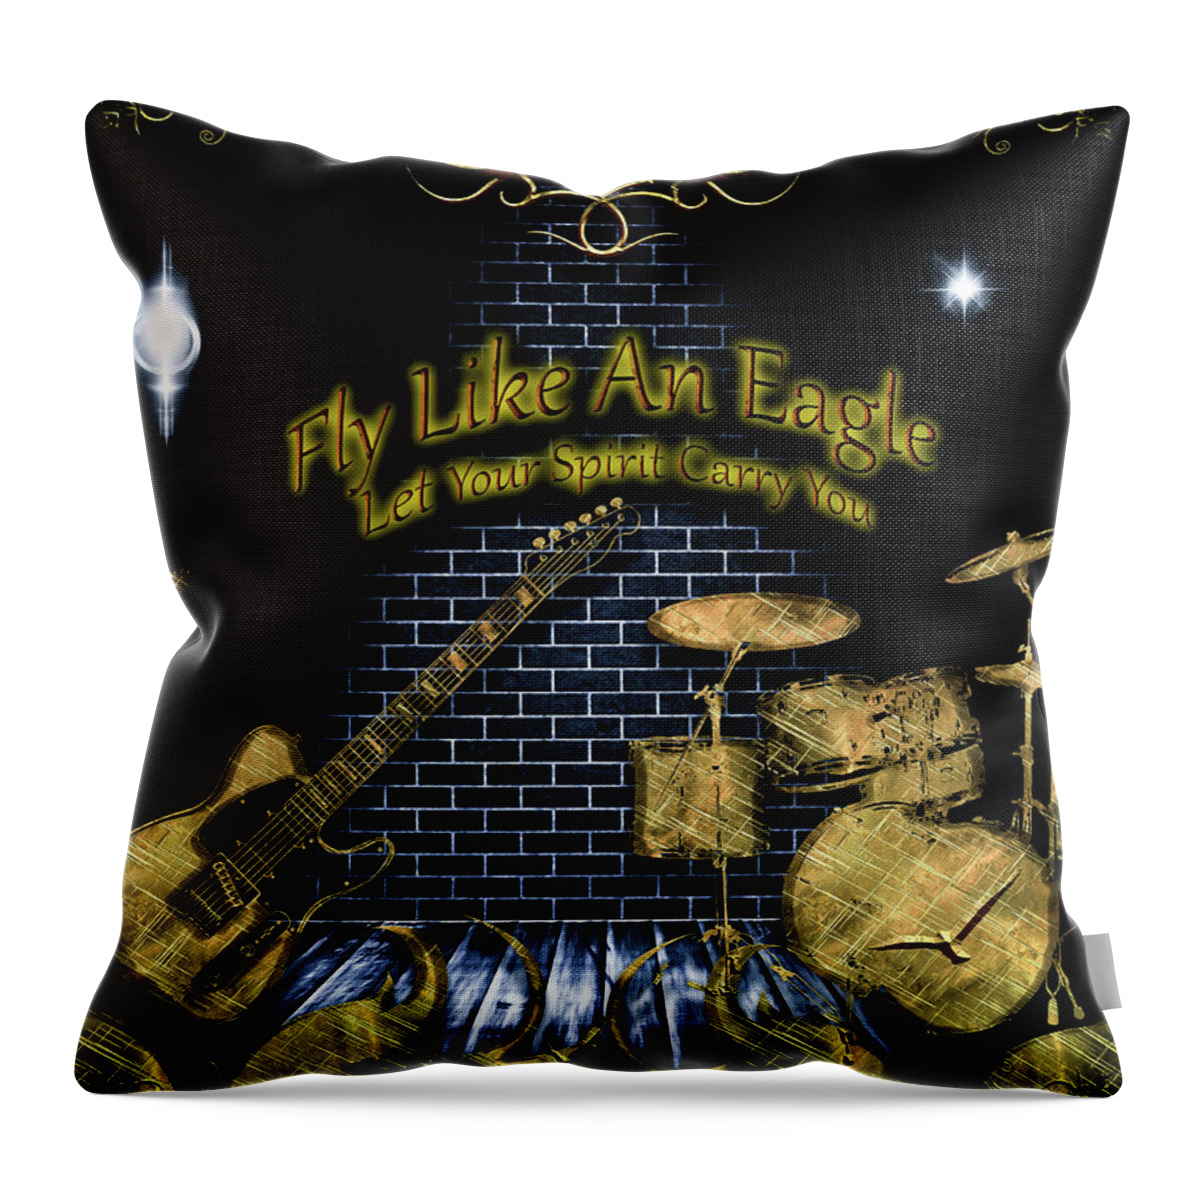 Rock Music Throw Pillow featuring the digital art Fly Like An Eagle by Michael Damiani